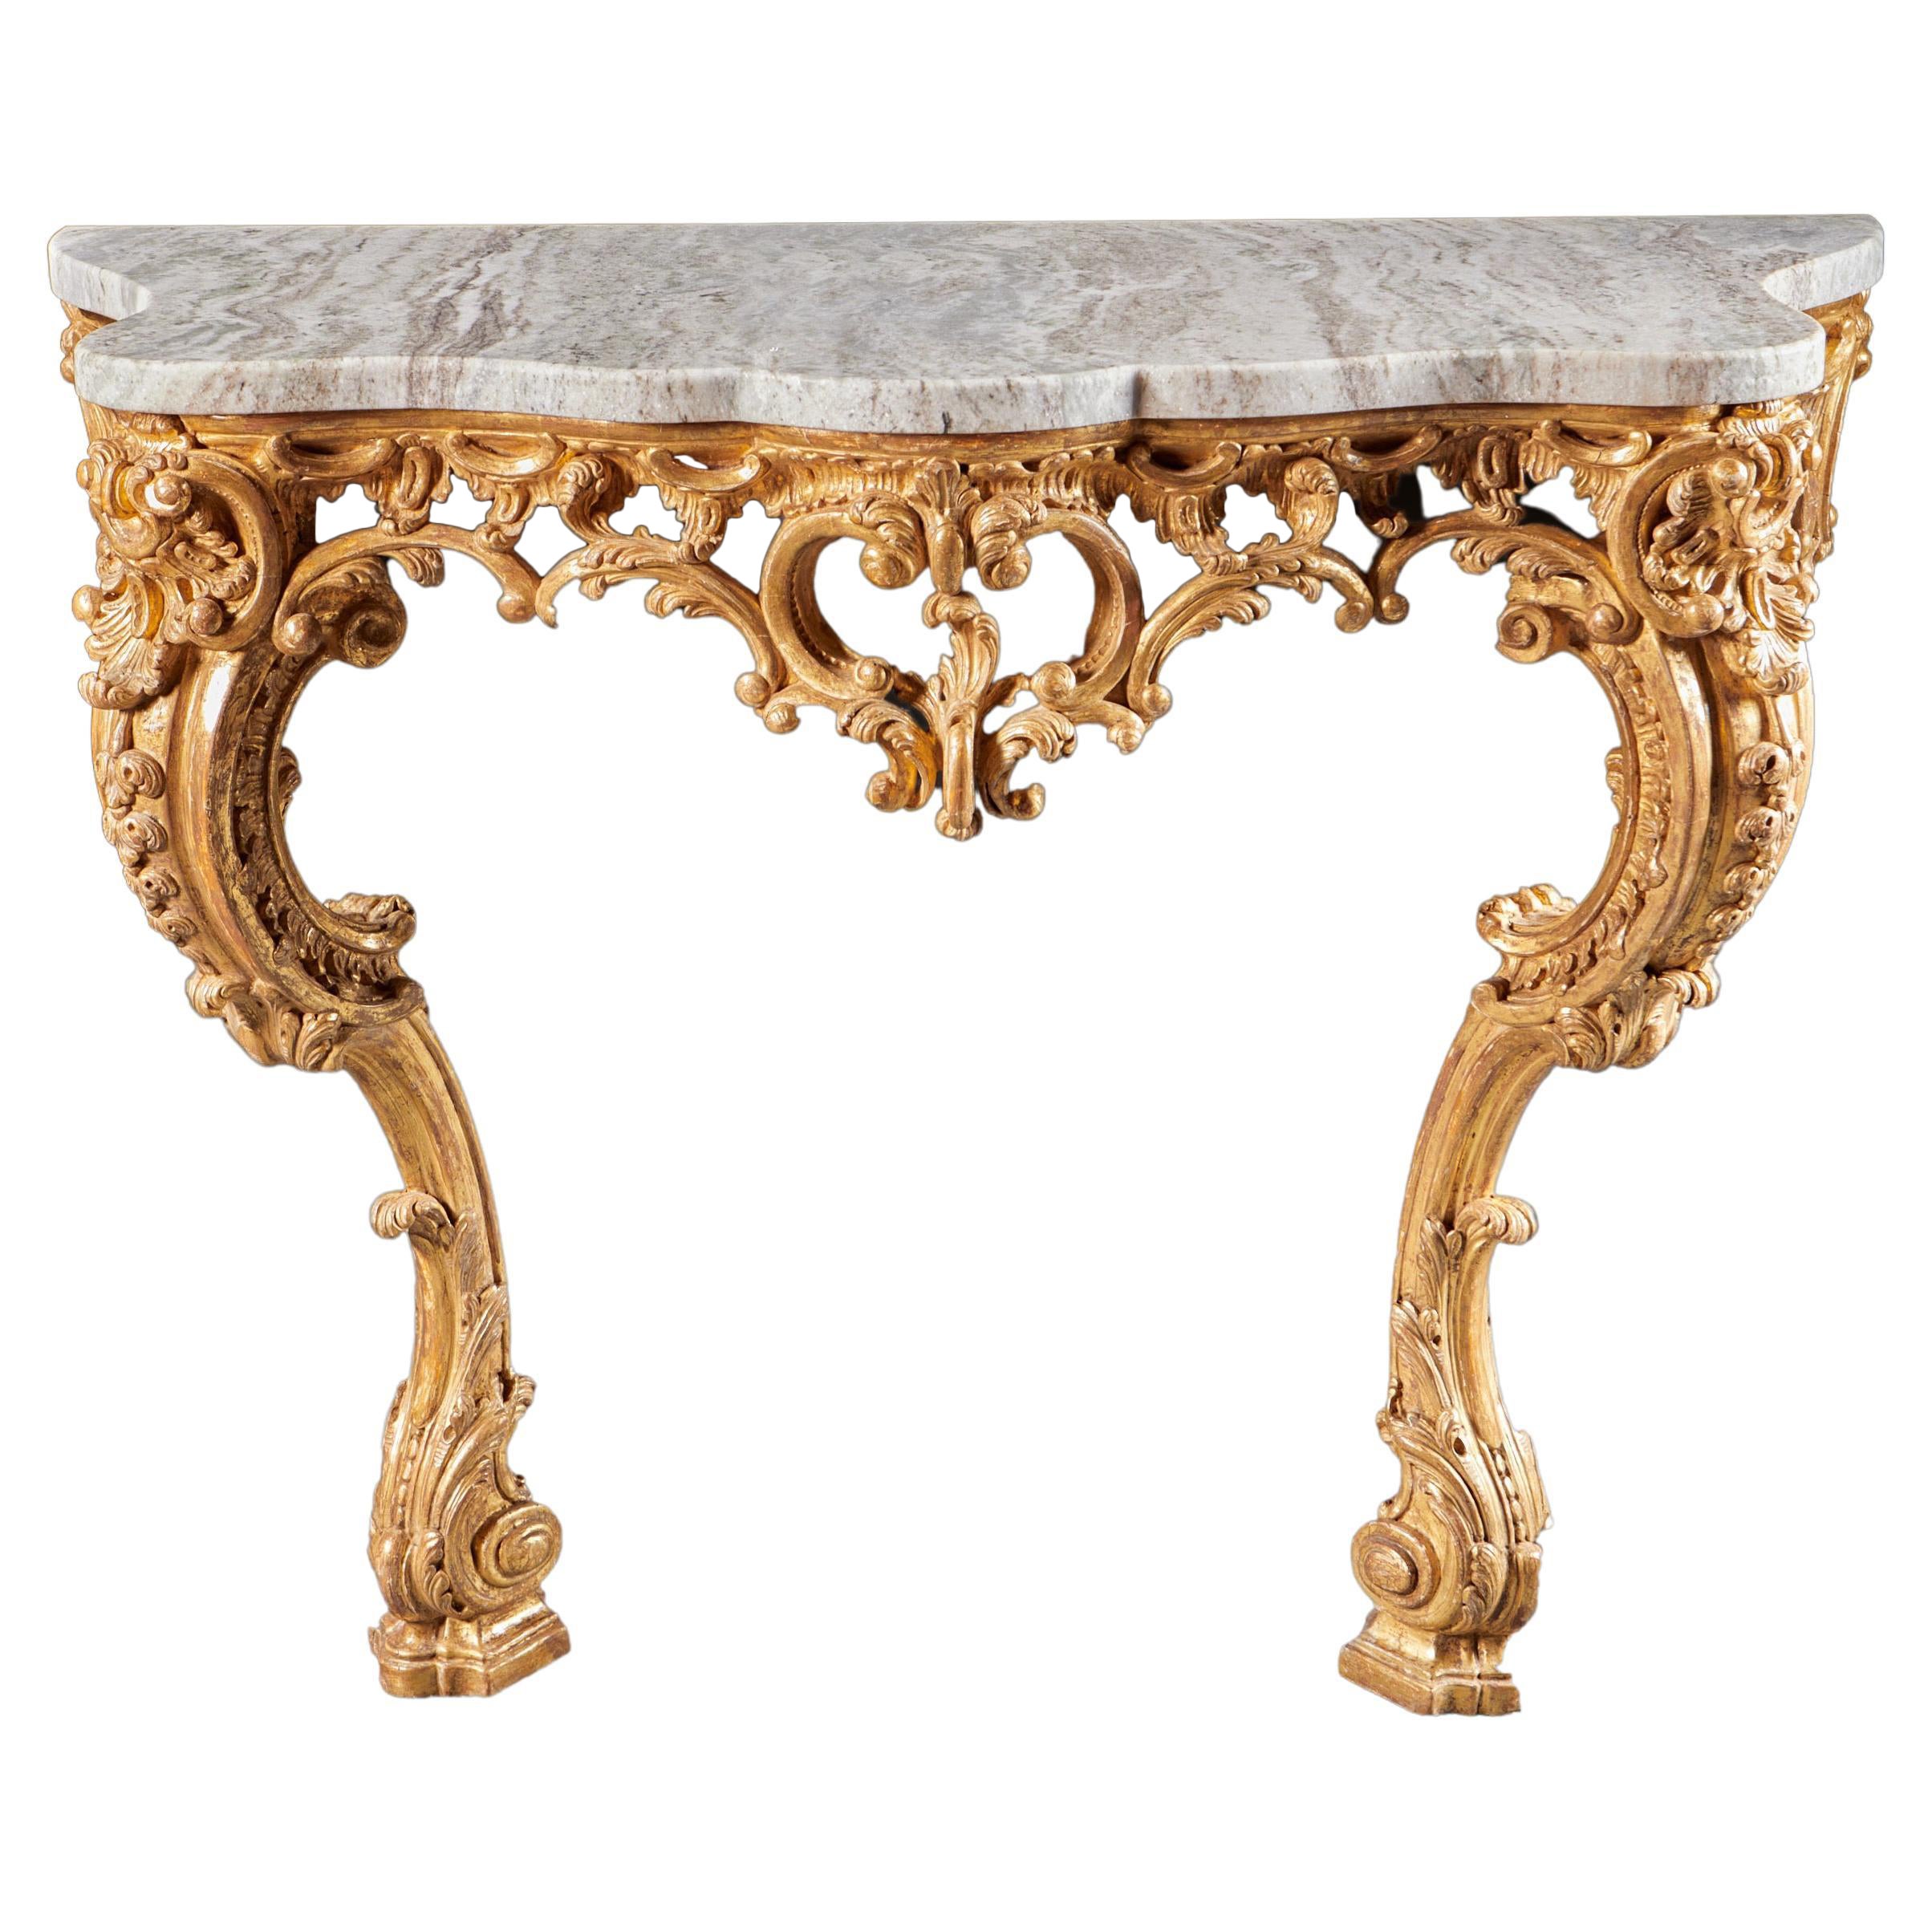 Exceptional English George III Period Carved and Gilded Rococo Console Table For Sale